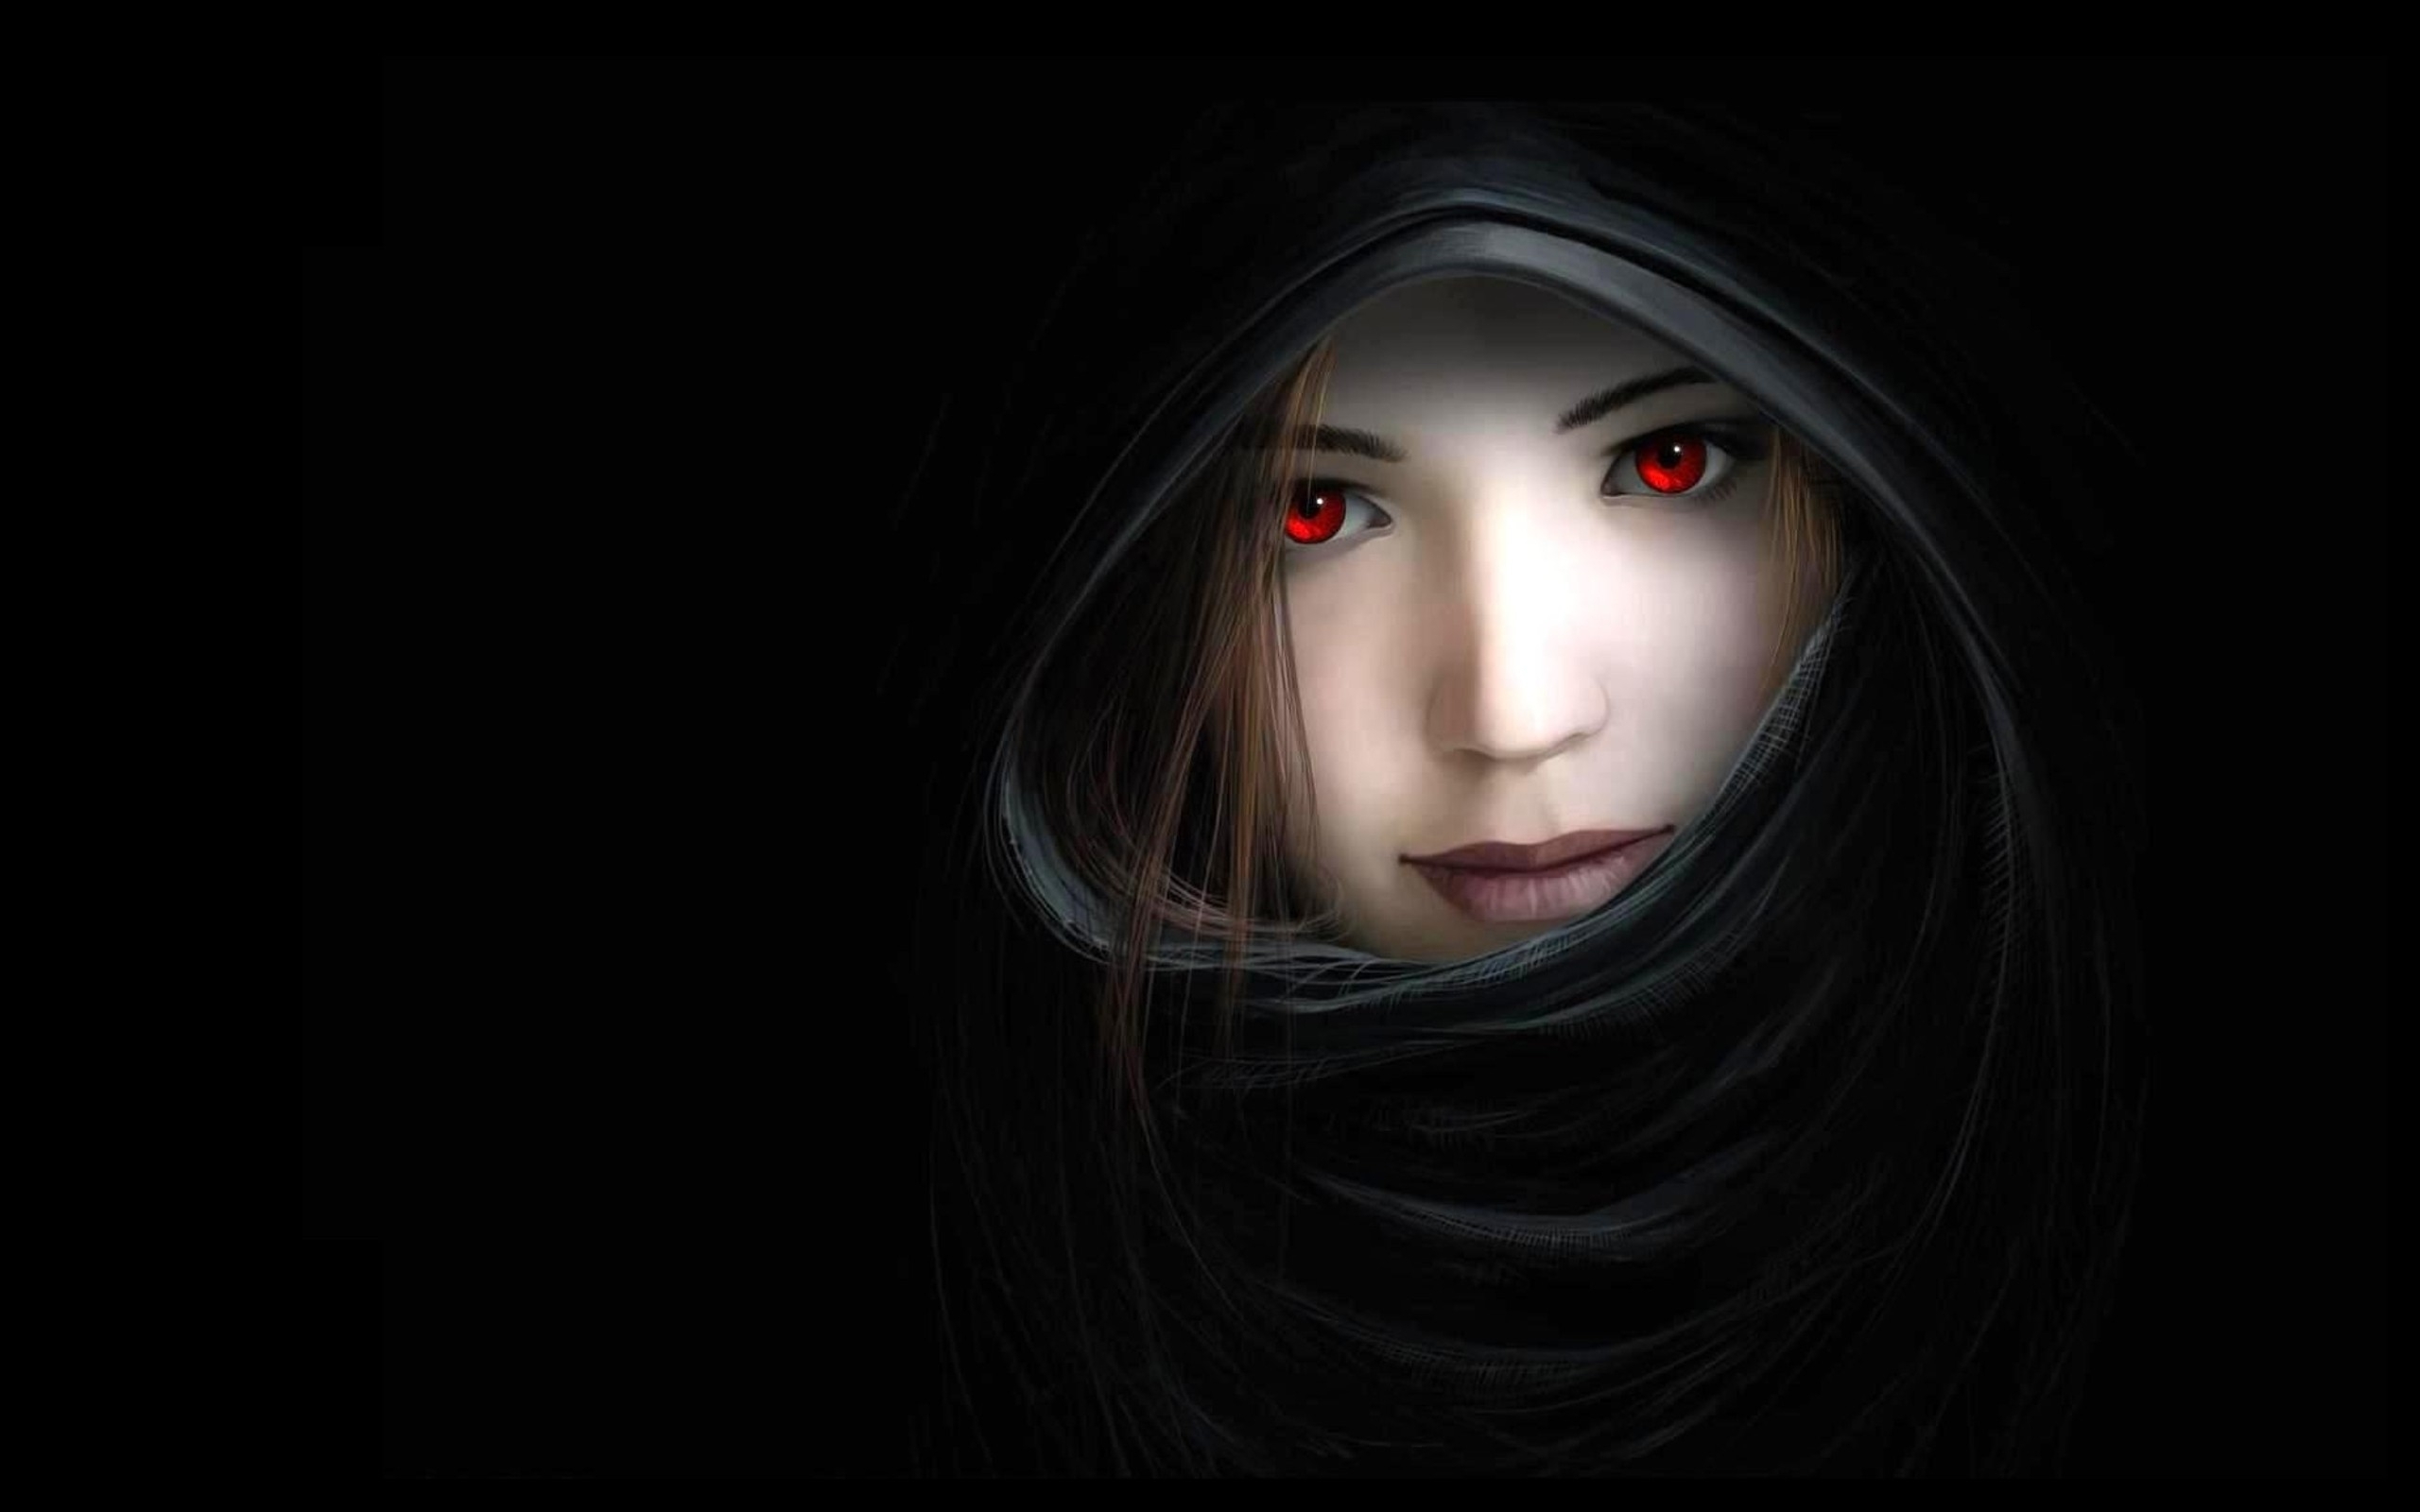 Wallpaper Women Dark Mouth Red Eyes Artwork Noses Hooded Witches